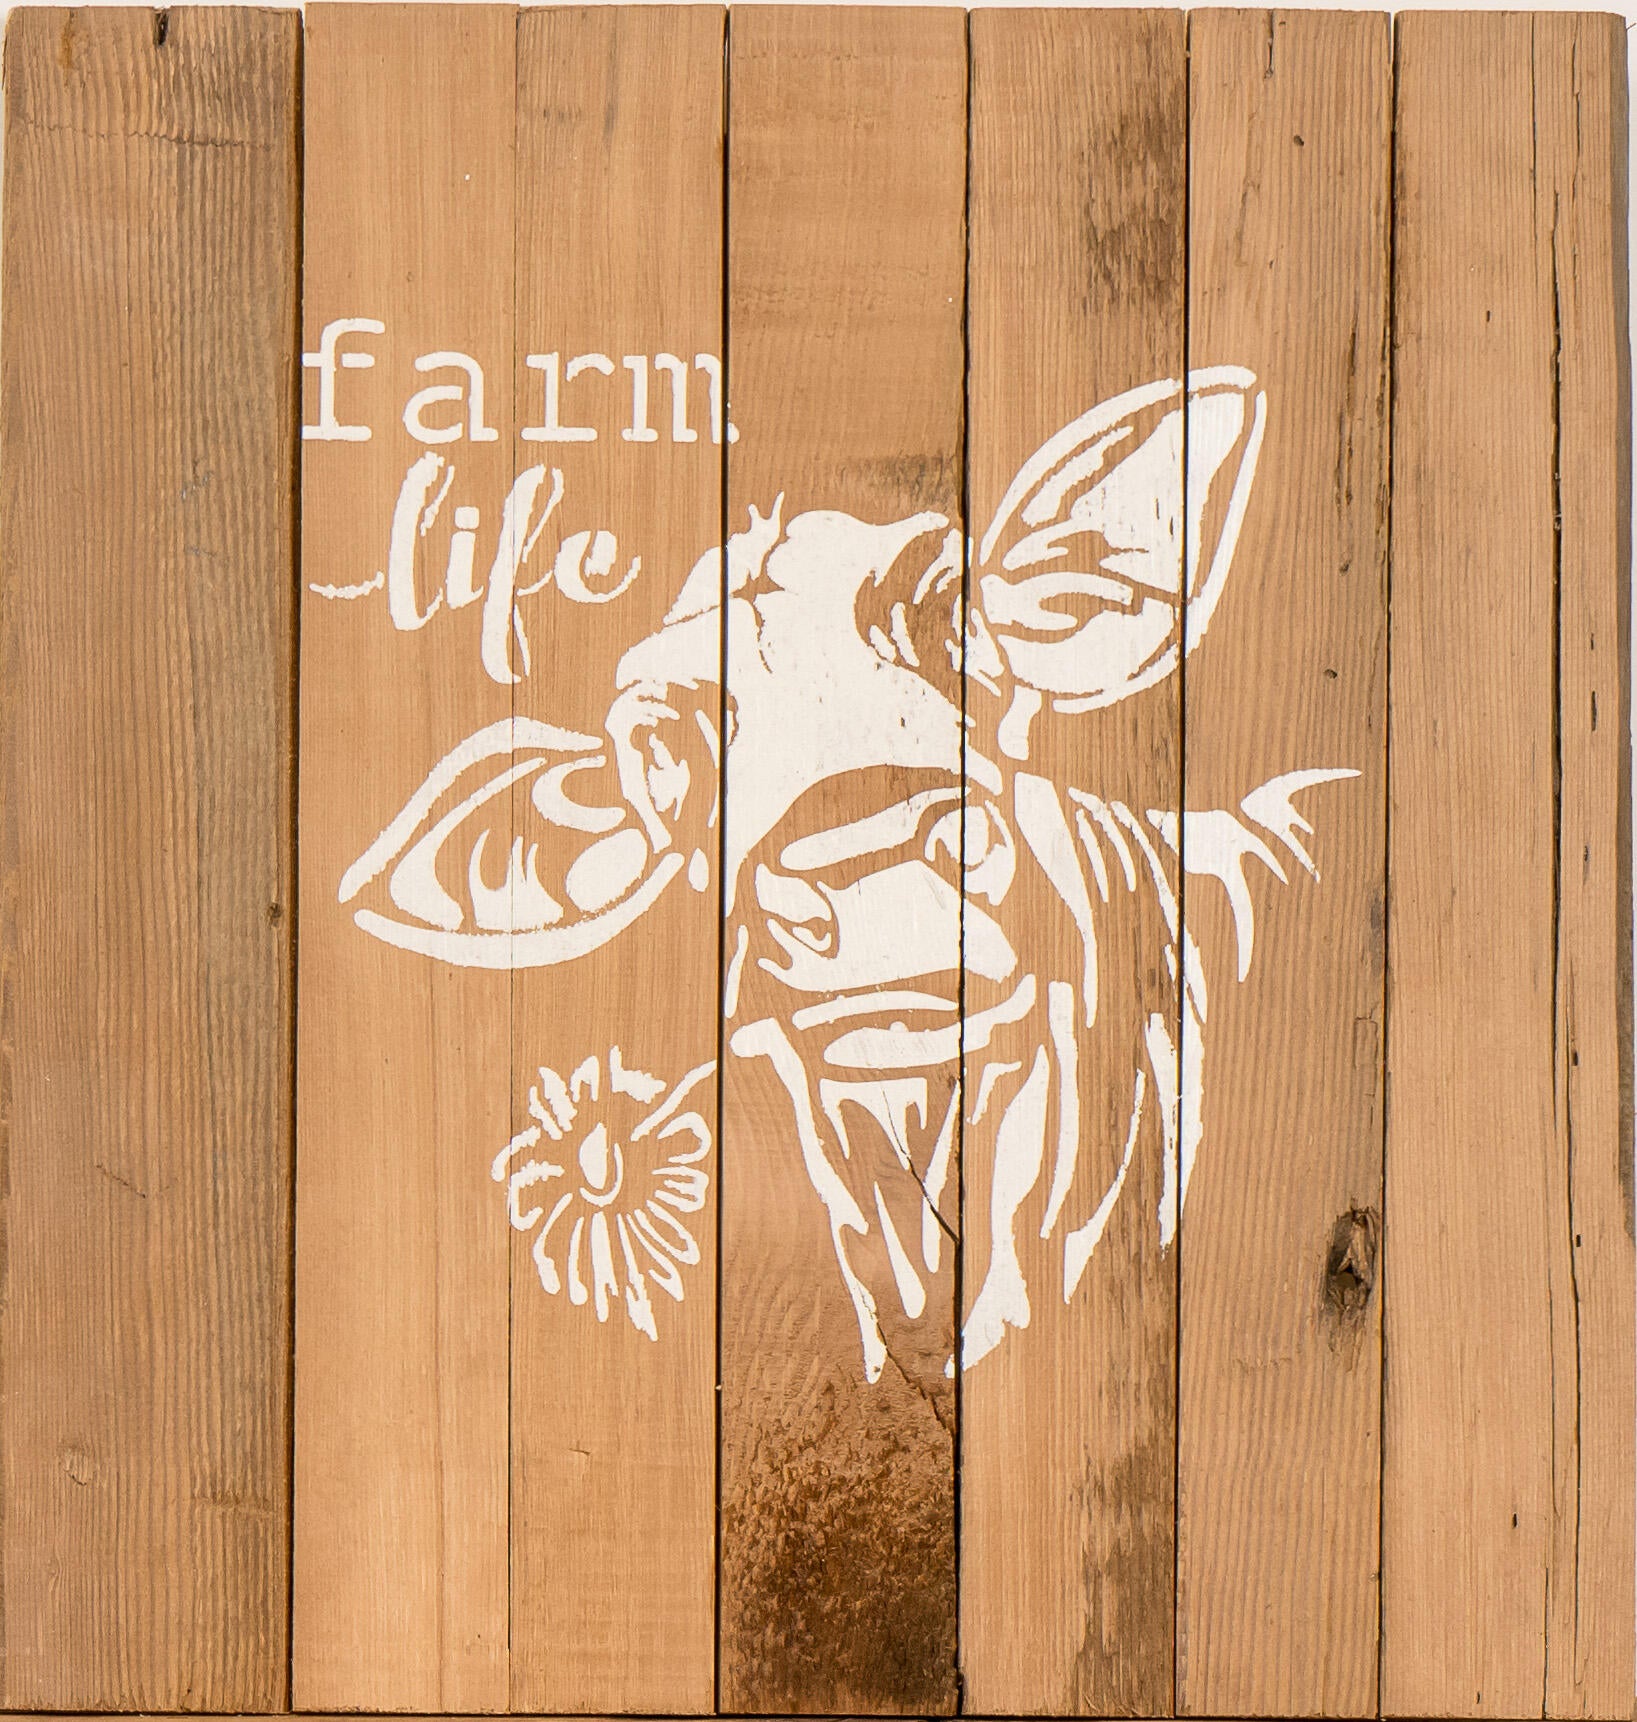 close up of stamped paint design centered on natural and reclaimed barnwood strips put together to create a sign. Design reads Farm Life with a cow holding a flower in its mouth underneath. Wood has distressed characteristics.